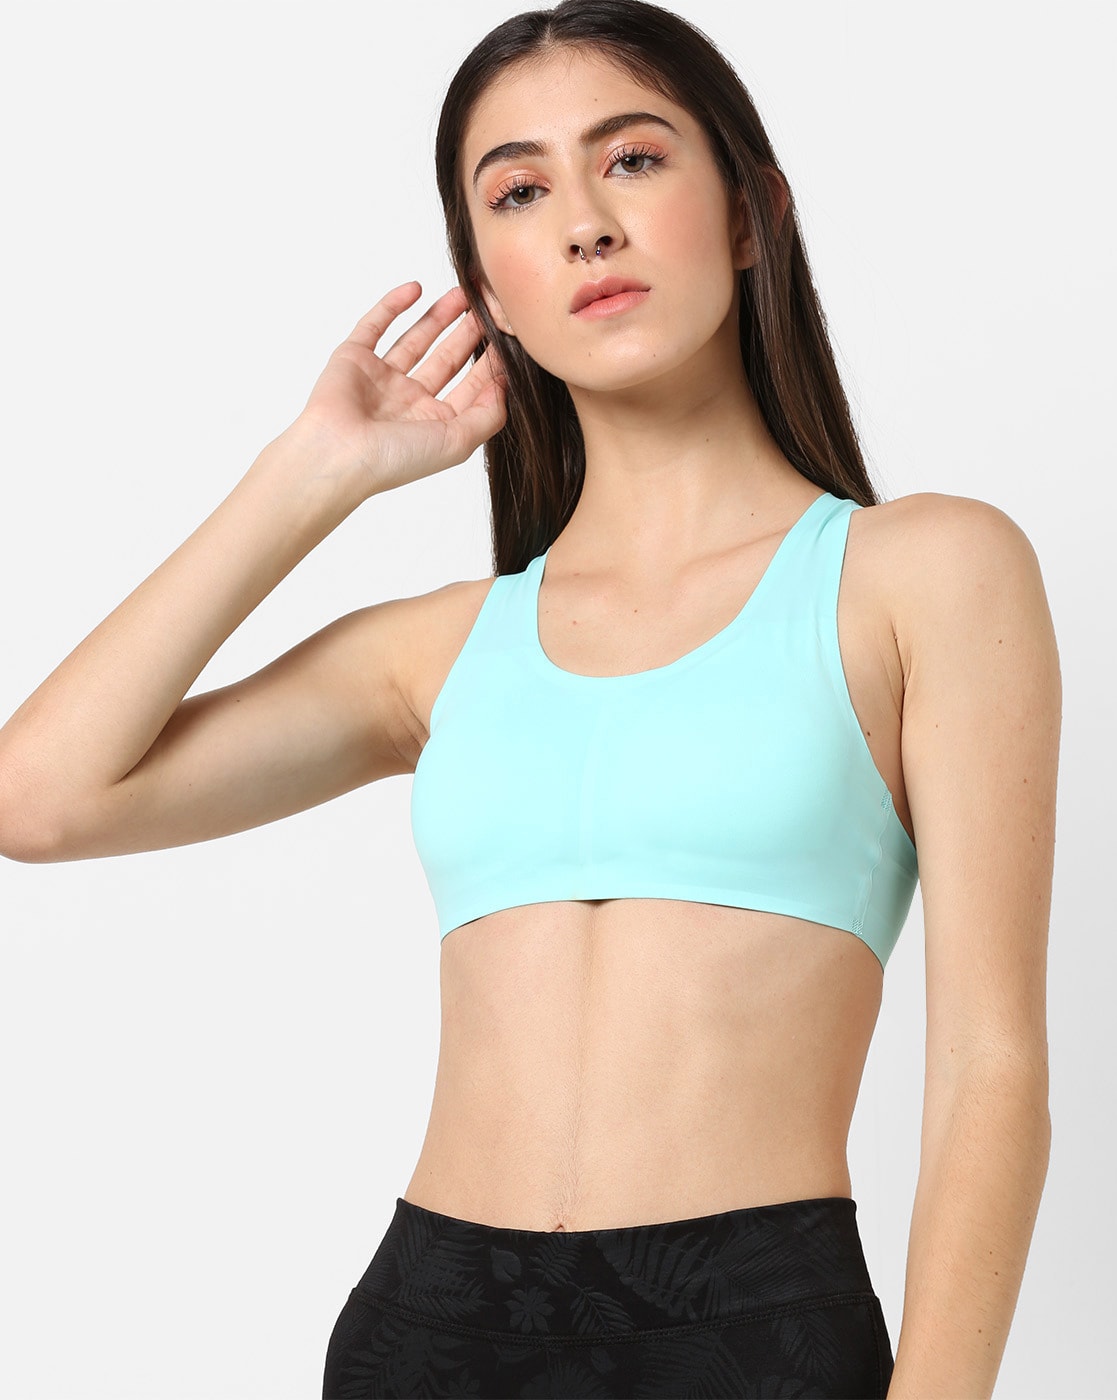 Turquoise Blue Color Sports Bra, Solid Color Bright Best Padded